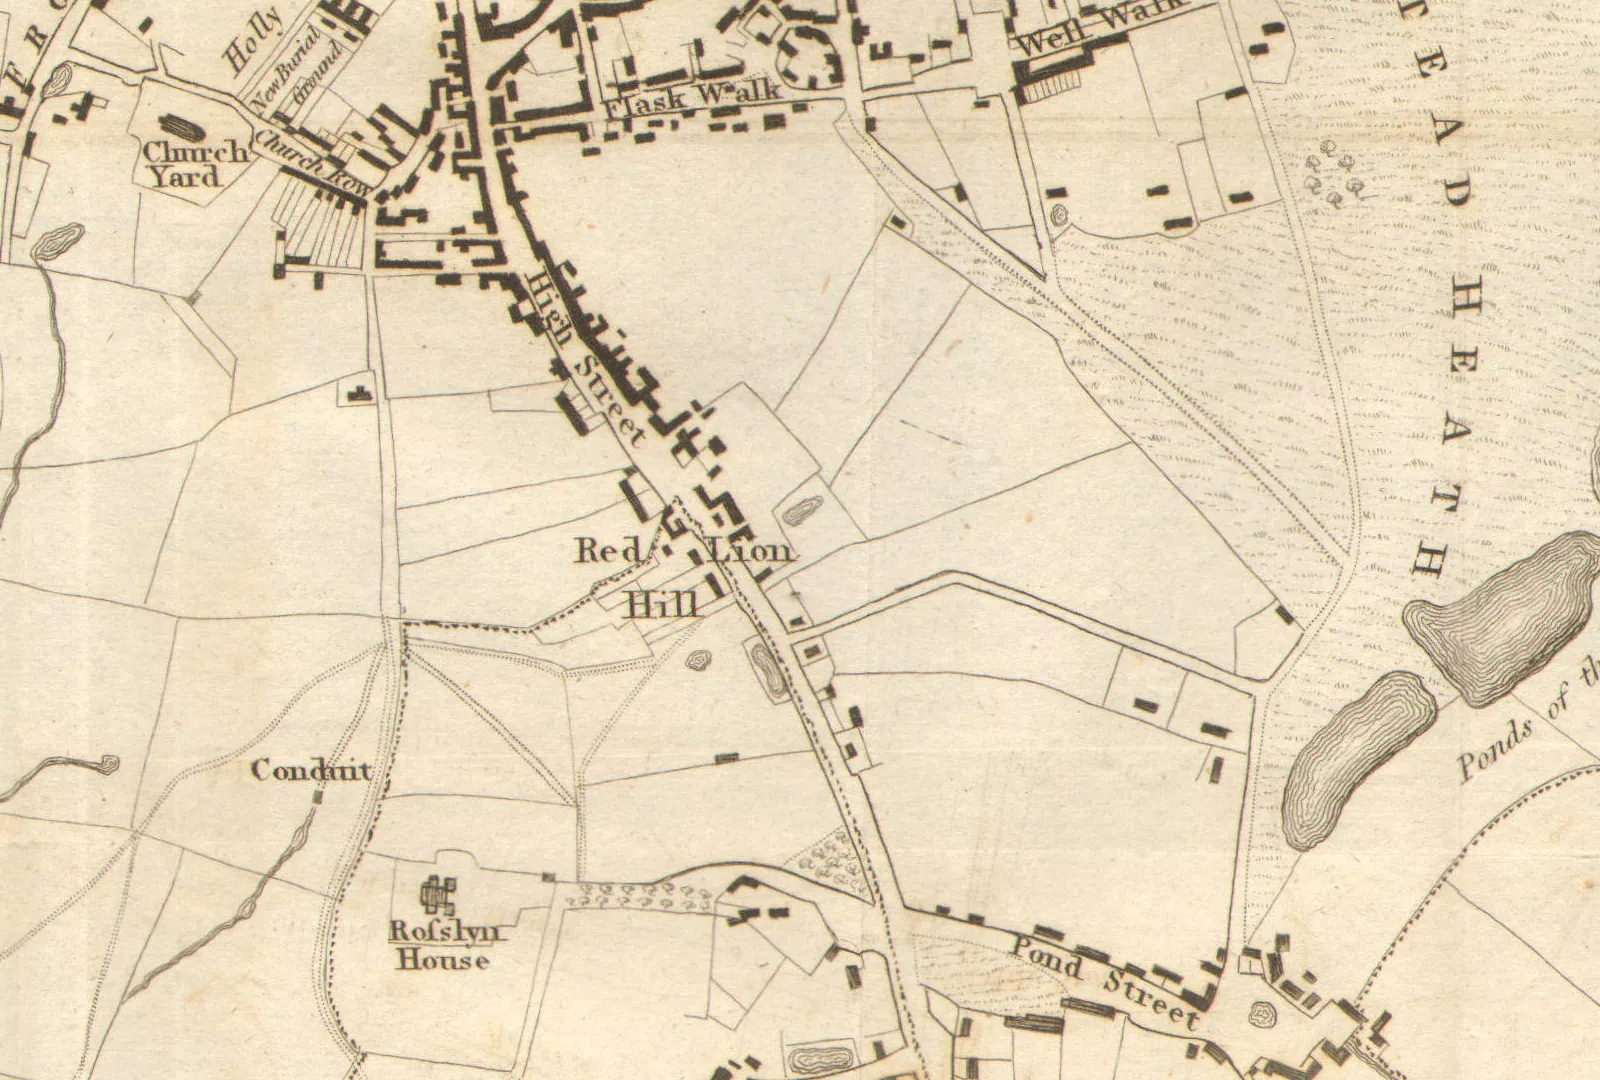 Extract of map by J & W Newton compiled in around 1813.